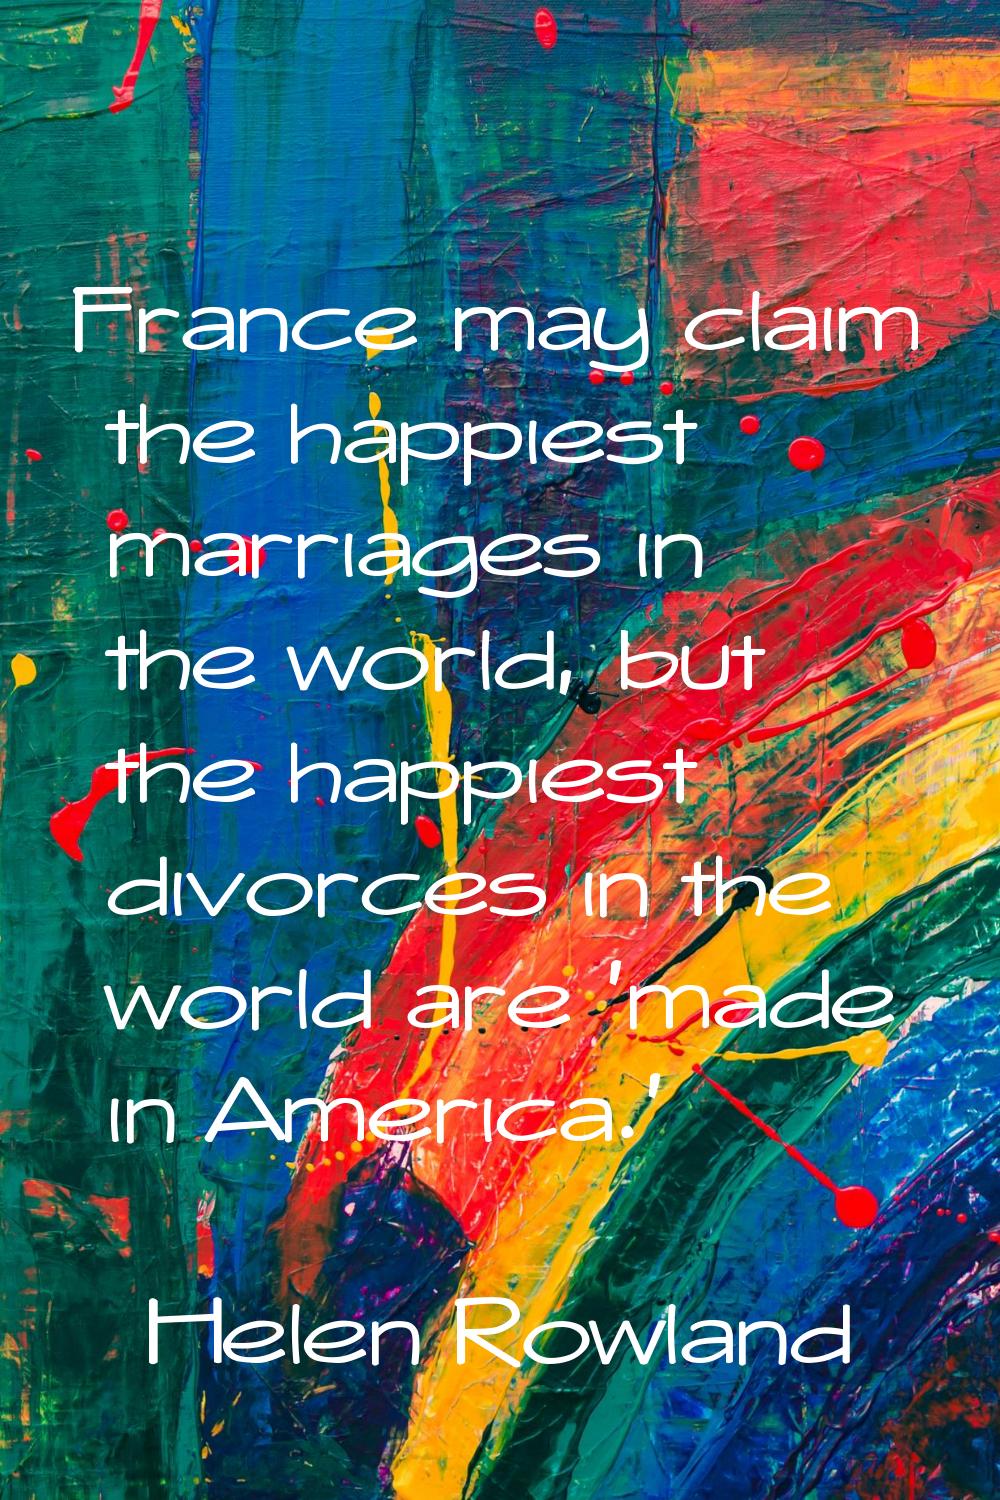 France may claim the happiest marriages in the world, but the happiest divorces in the world are 'm